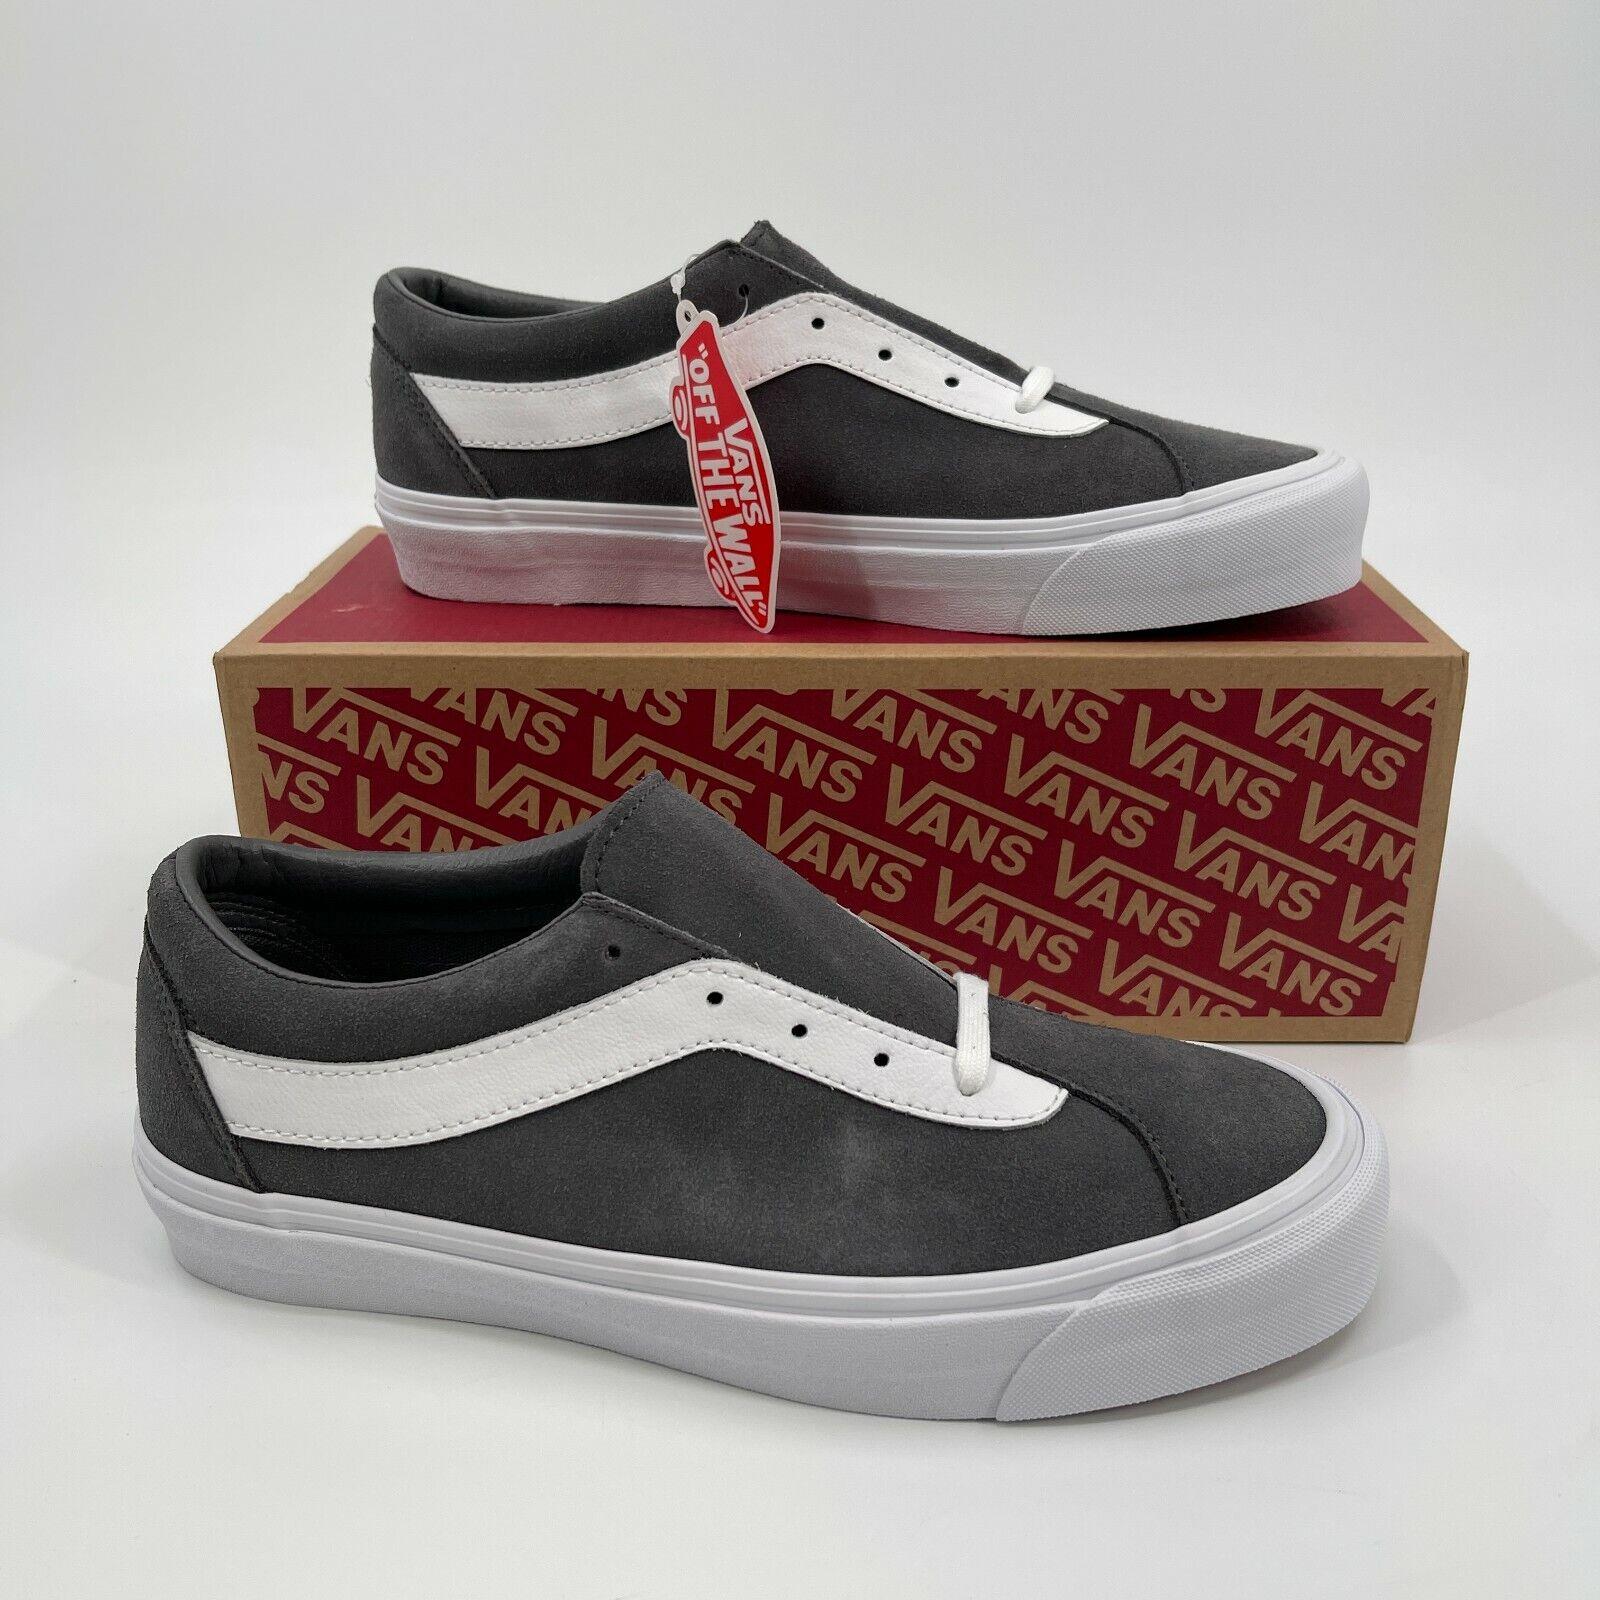 Vans Bold Ni Gray Suede Skate Shoes Sneakers Size Mens 9.5 Womens 11 Ultracush